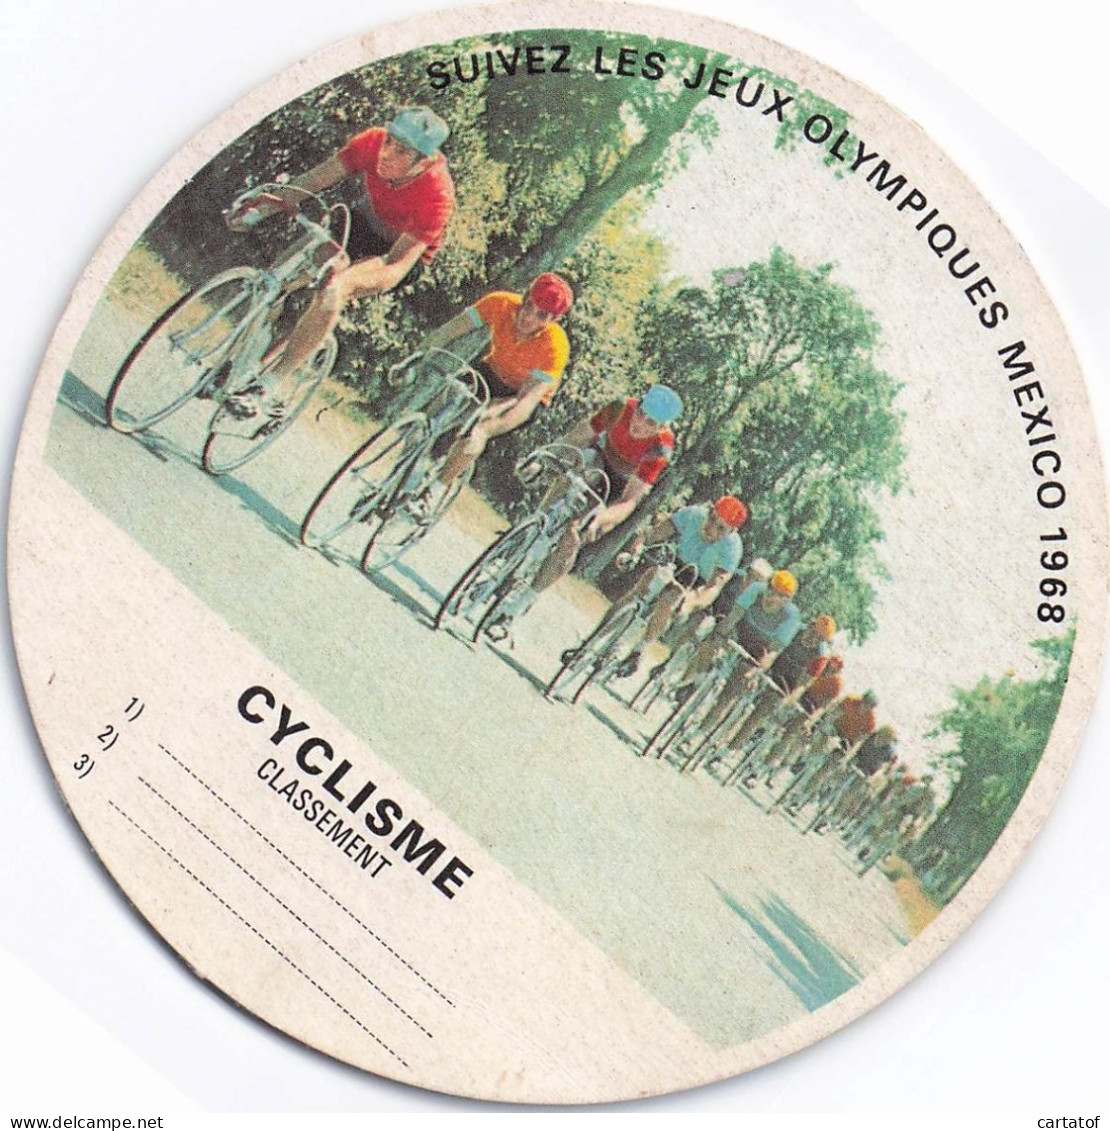 JEUX OLYMPIQUE MEXICO 1968 . Le Cyclisme  - Hotel Keycards